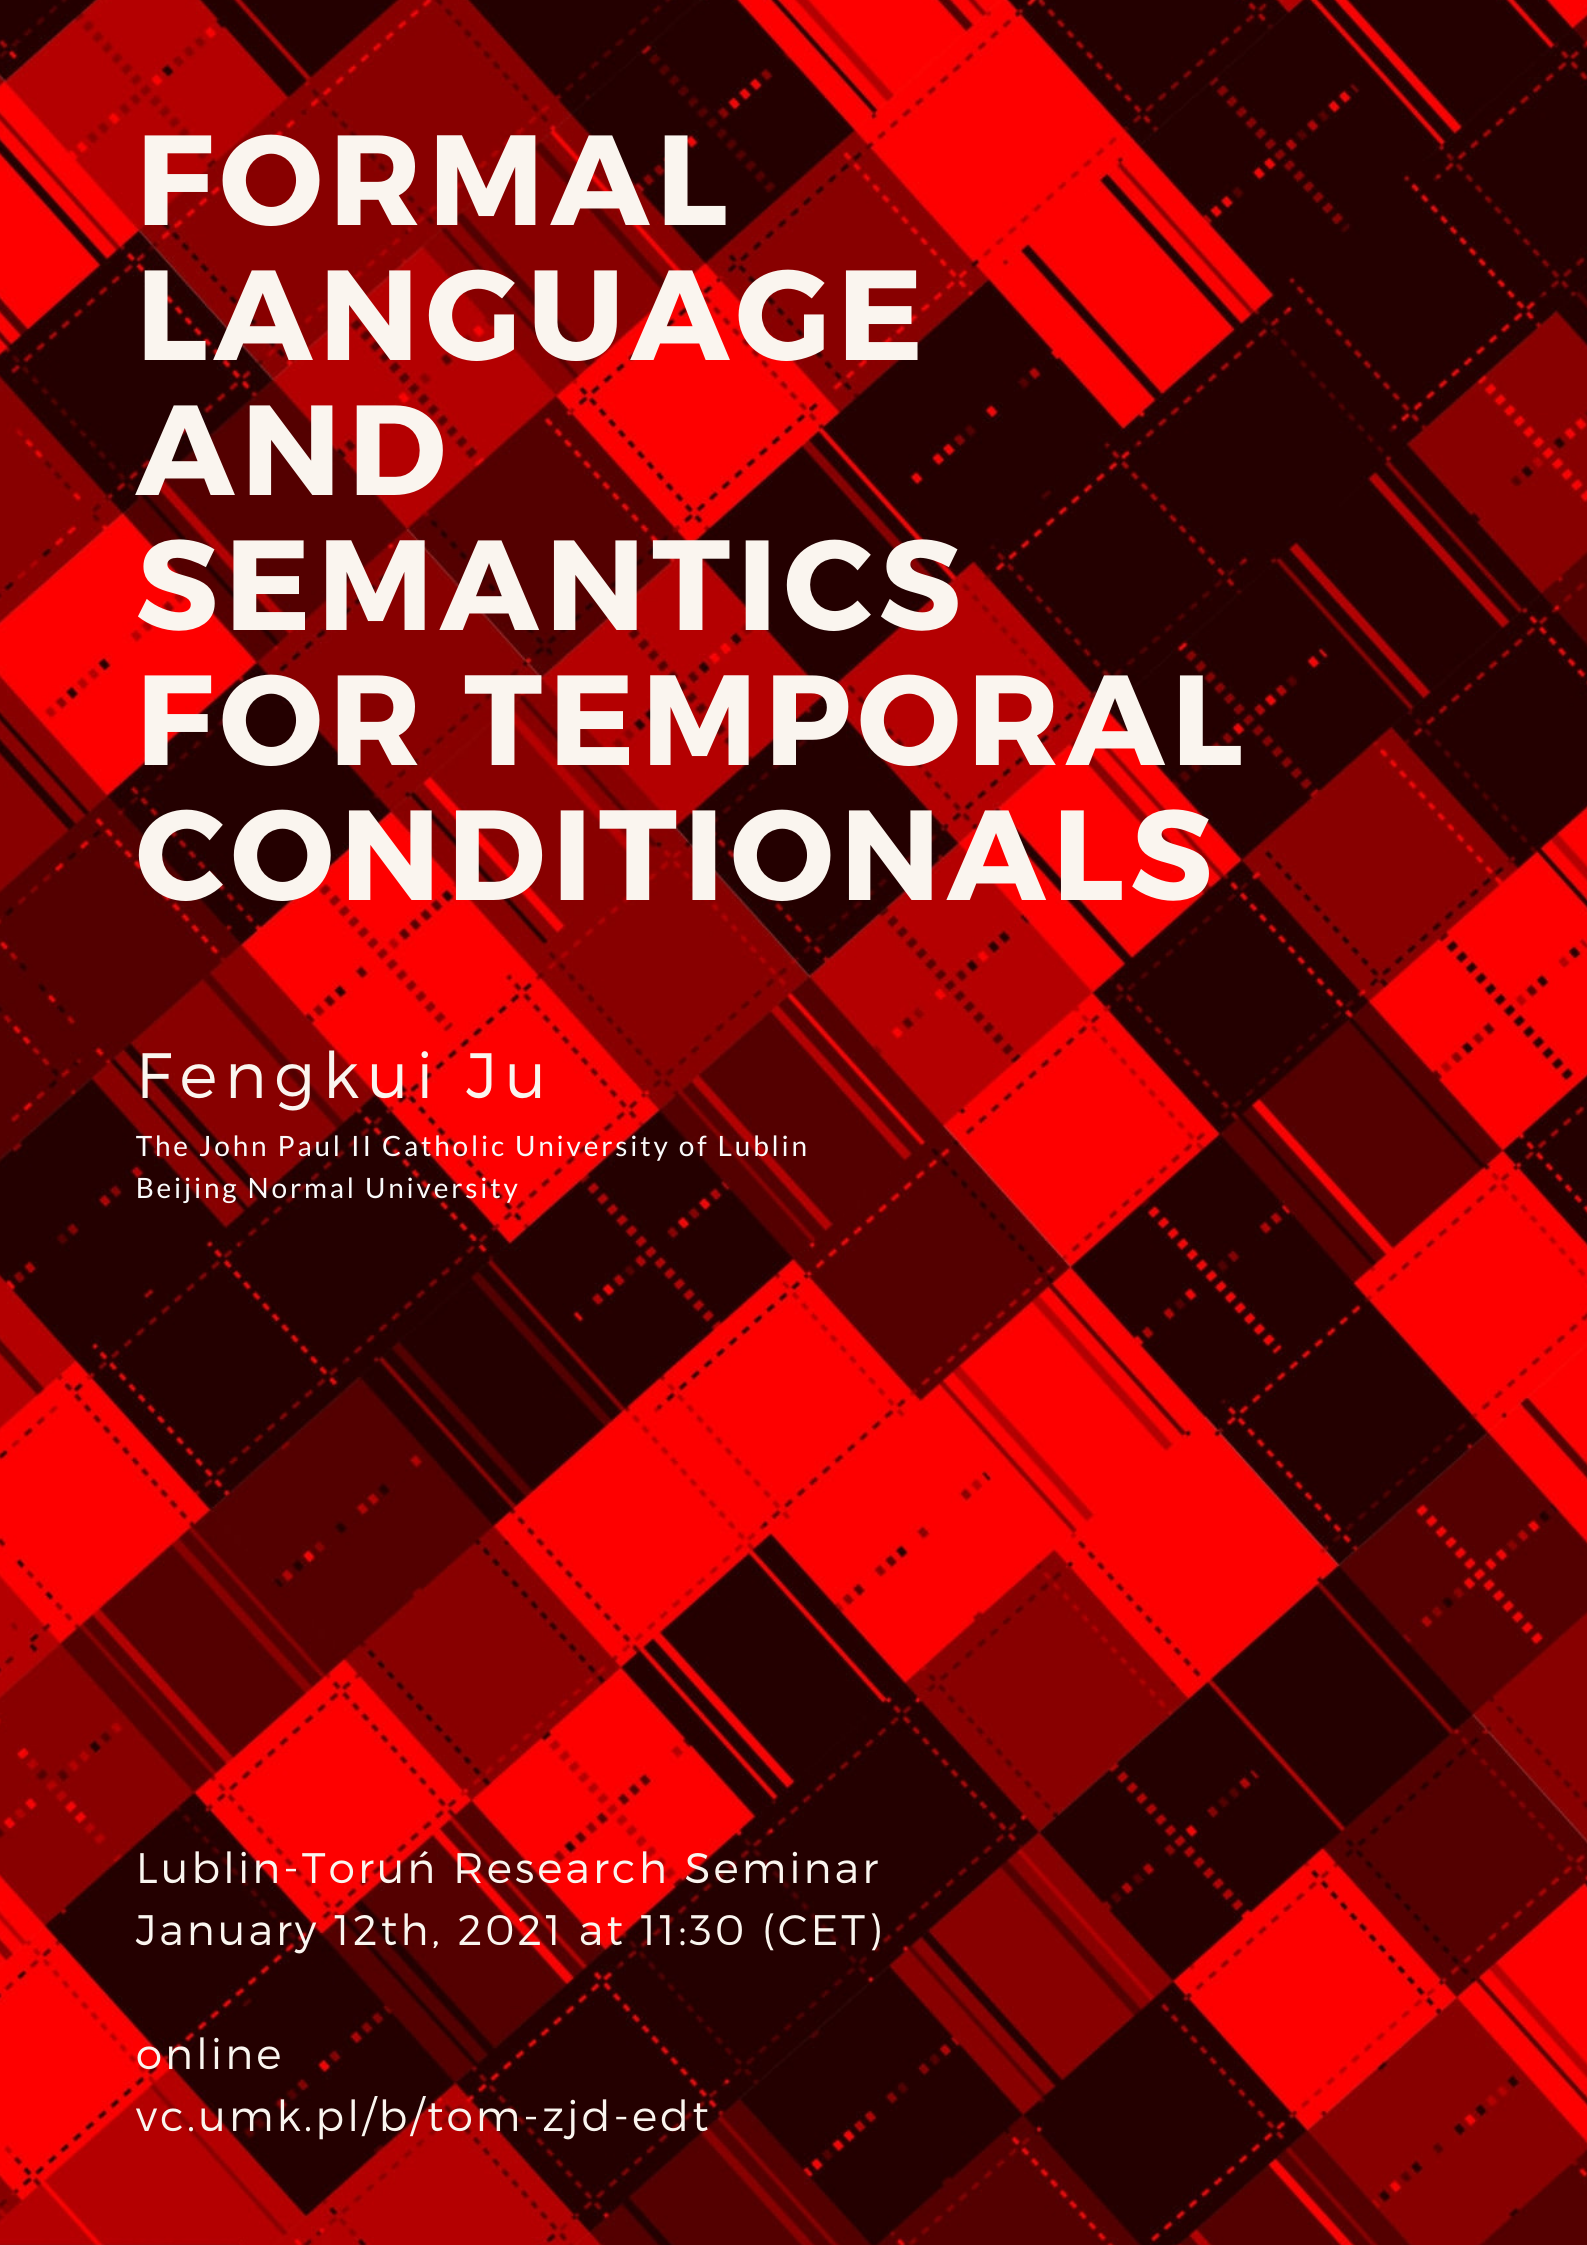 Fengkui Ju - Formal language and semantics for temporal conditionals